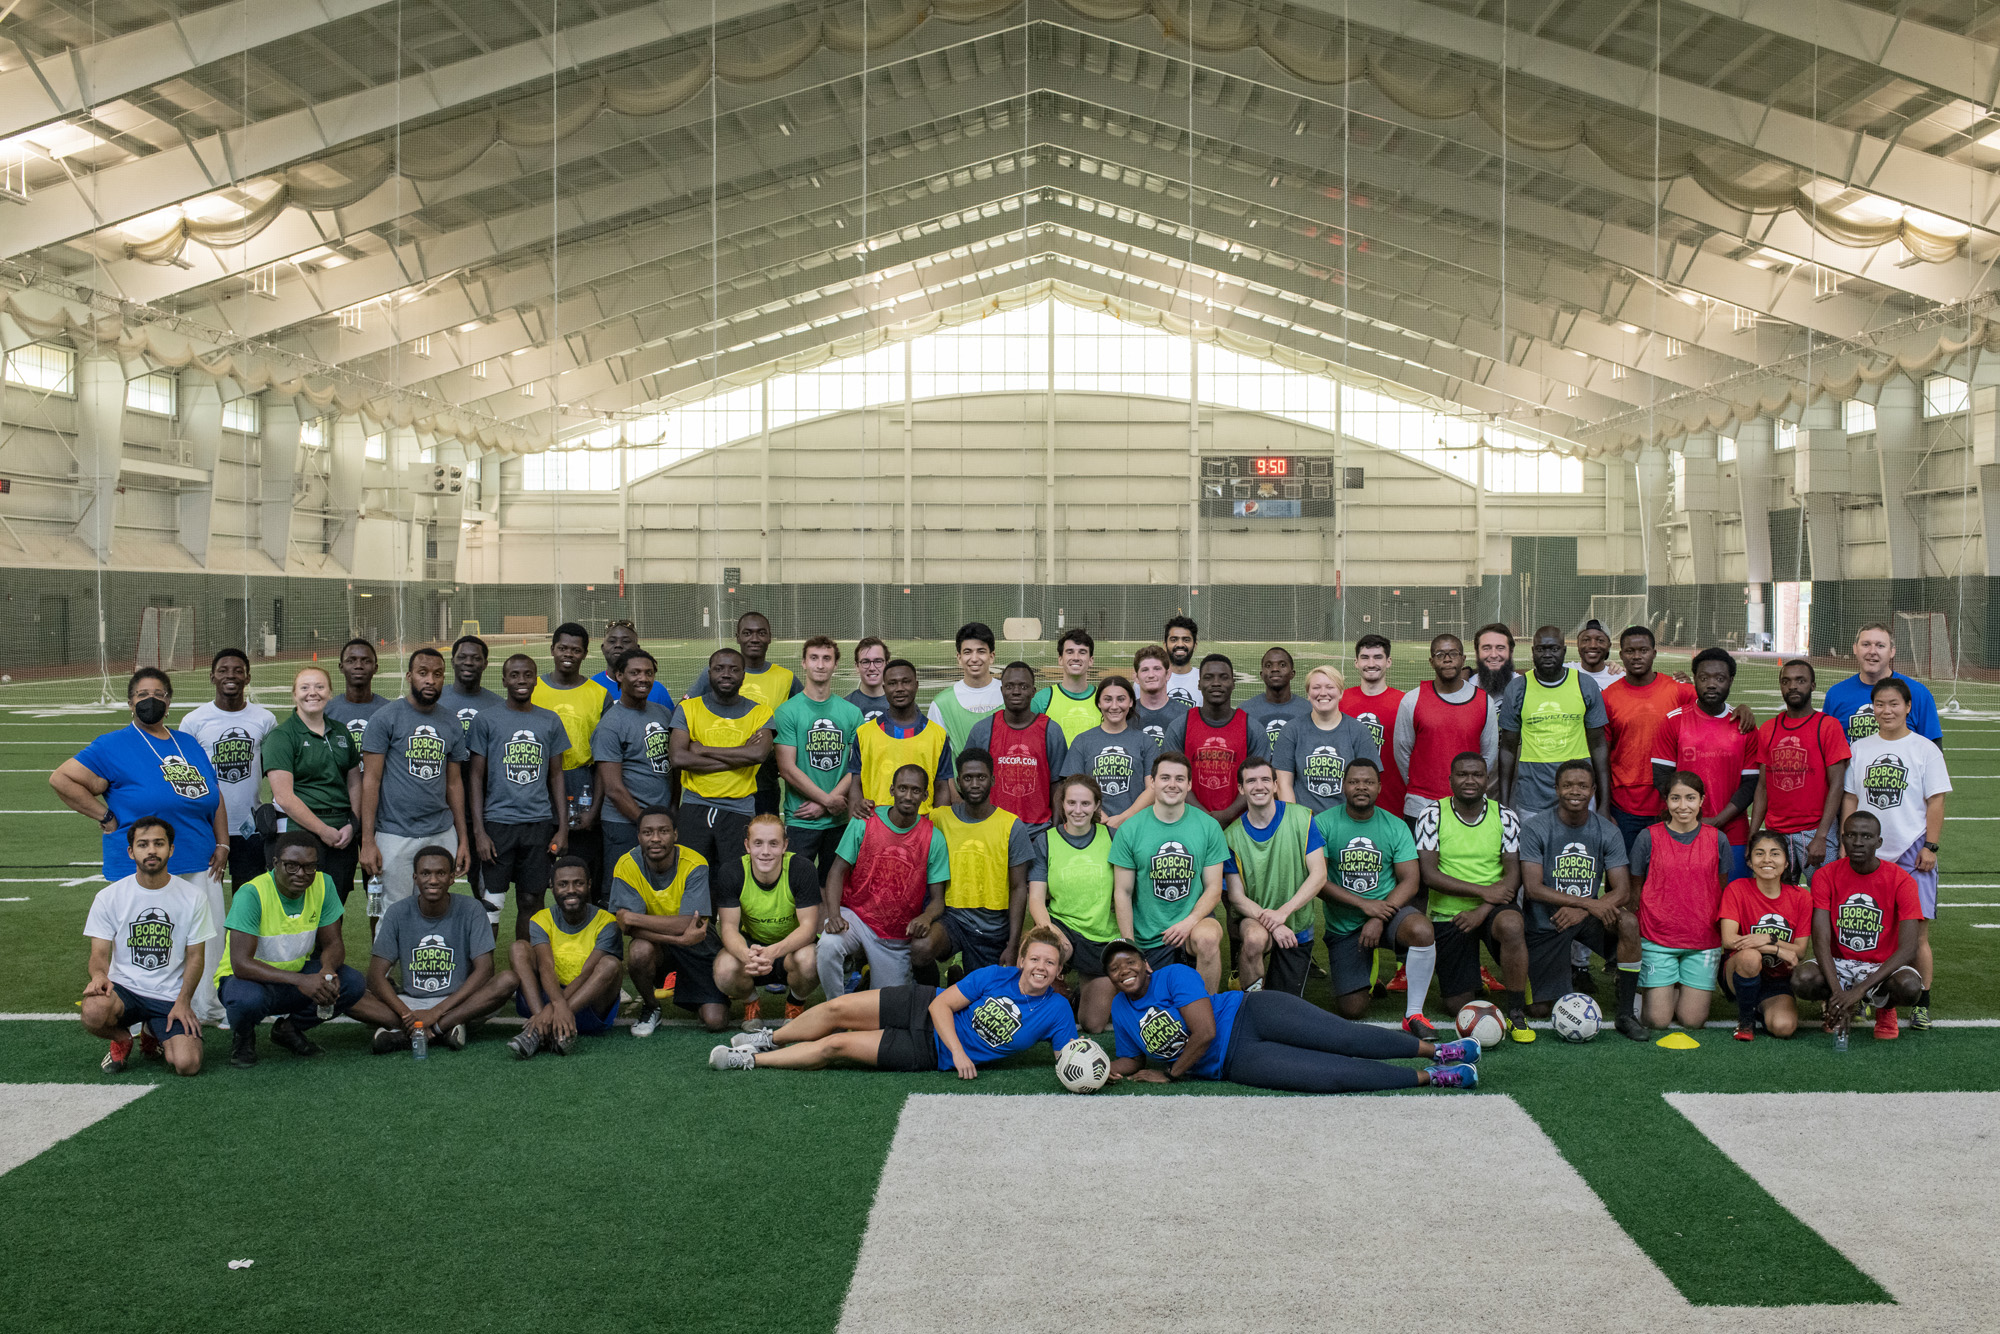 Soccer Tournament participants and supporters gather for a group photo.